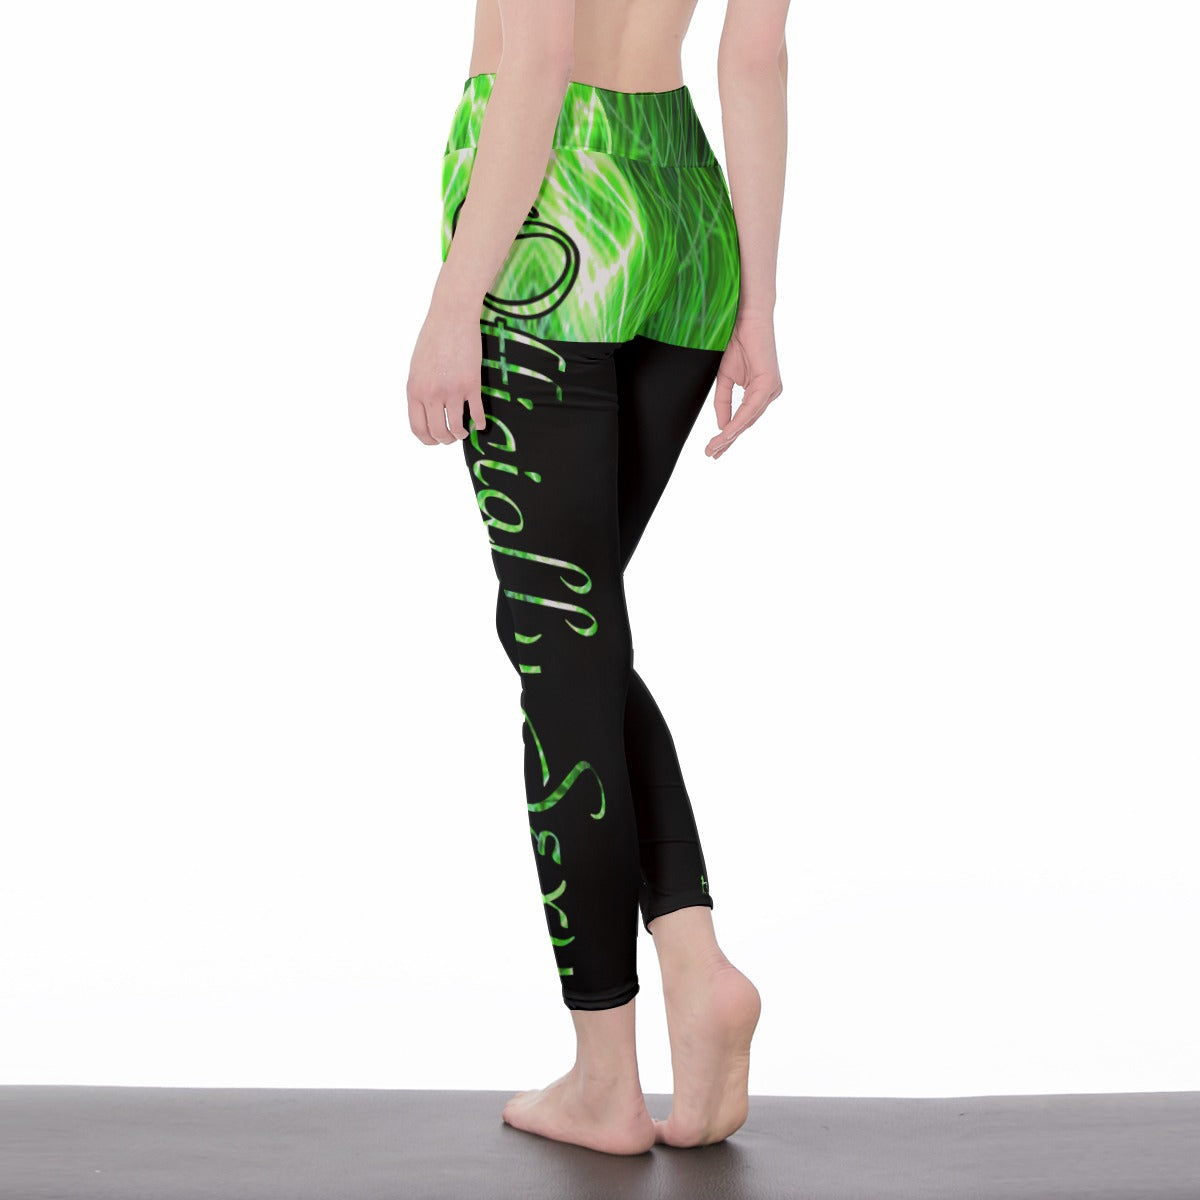 Officially Sexy Neon Green Laser Hearts High Waist Black Booty Popper Leggings With (English) 3 Left Leg